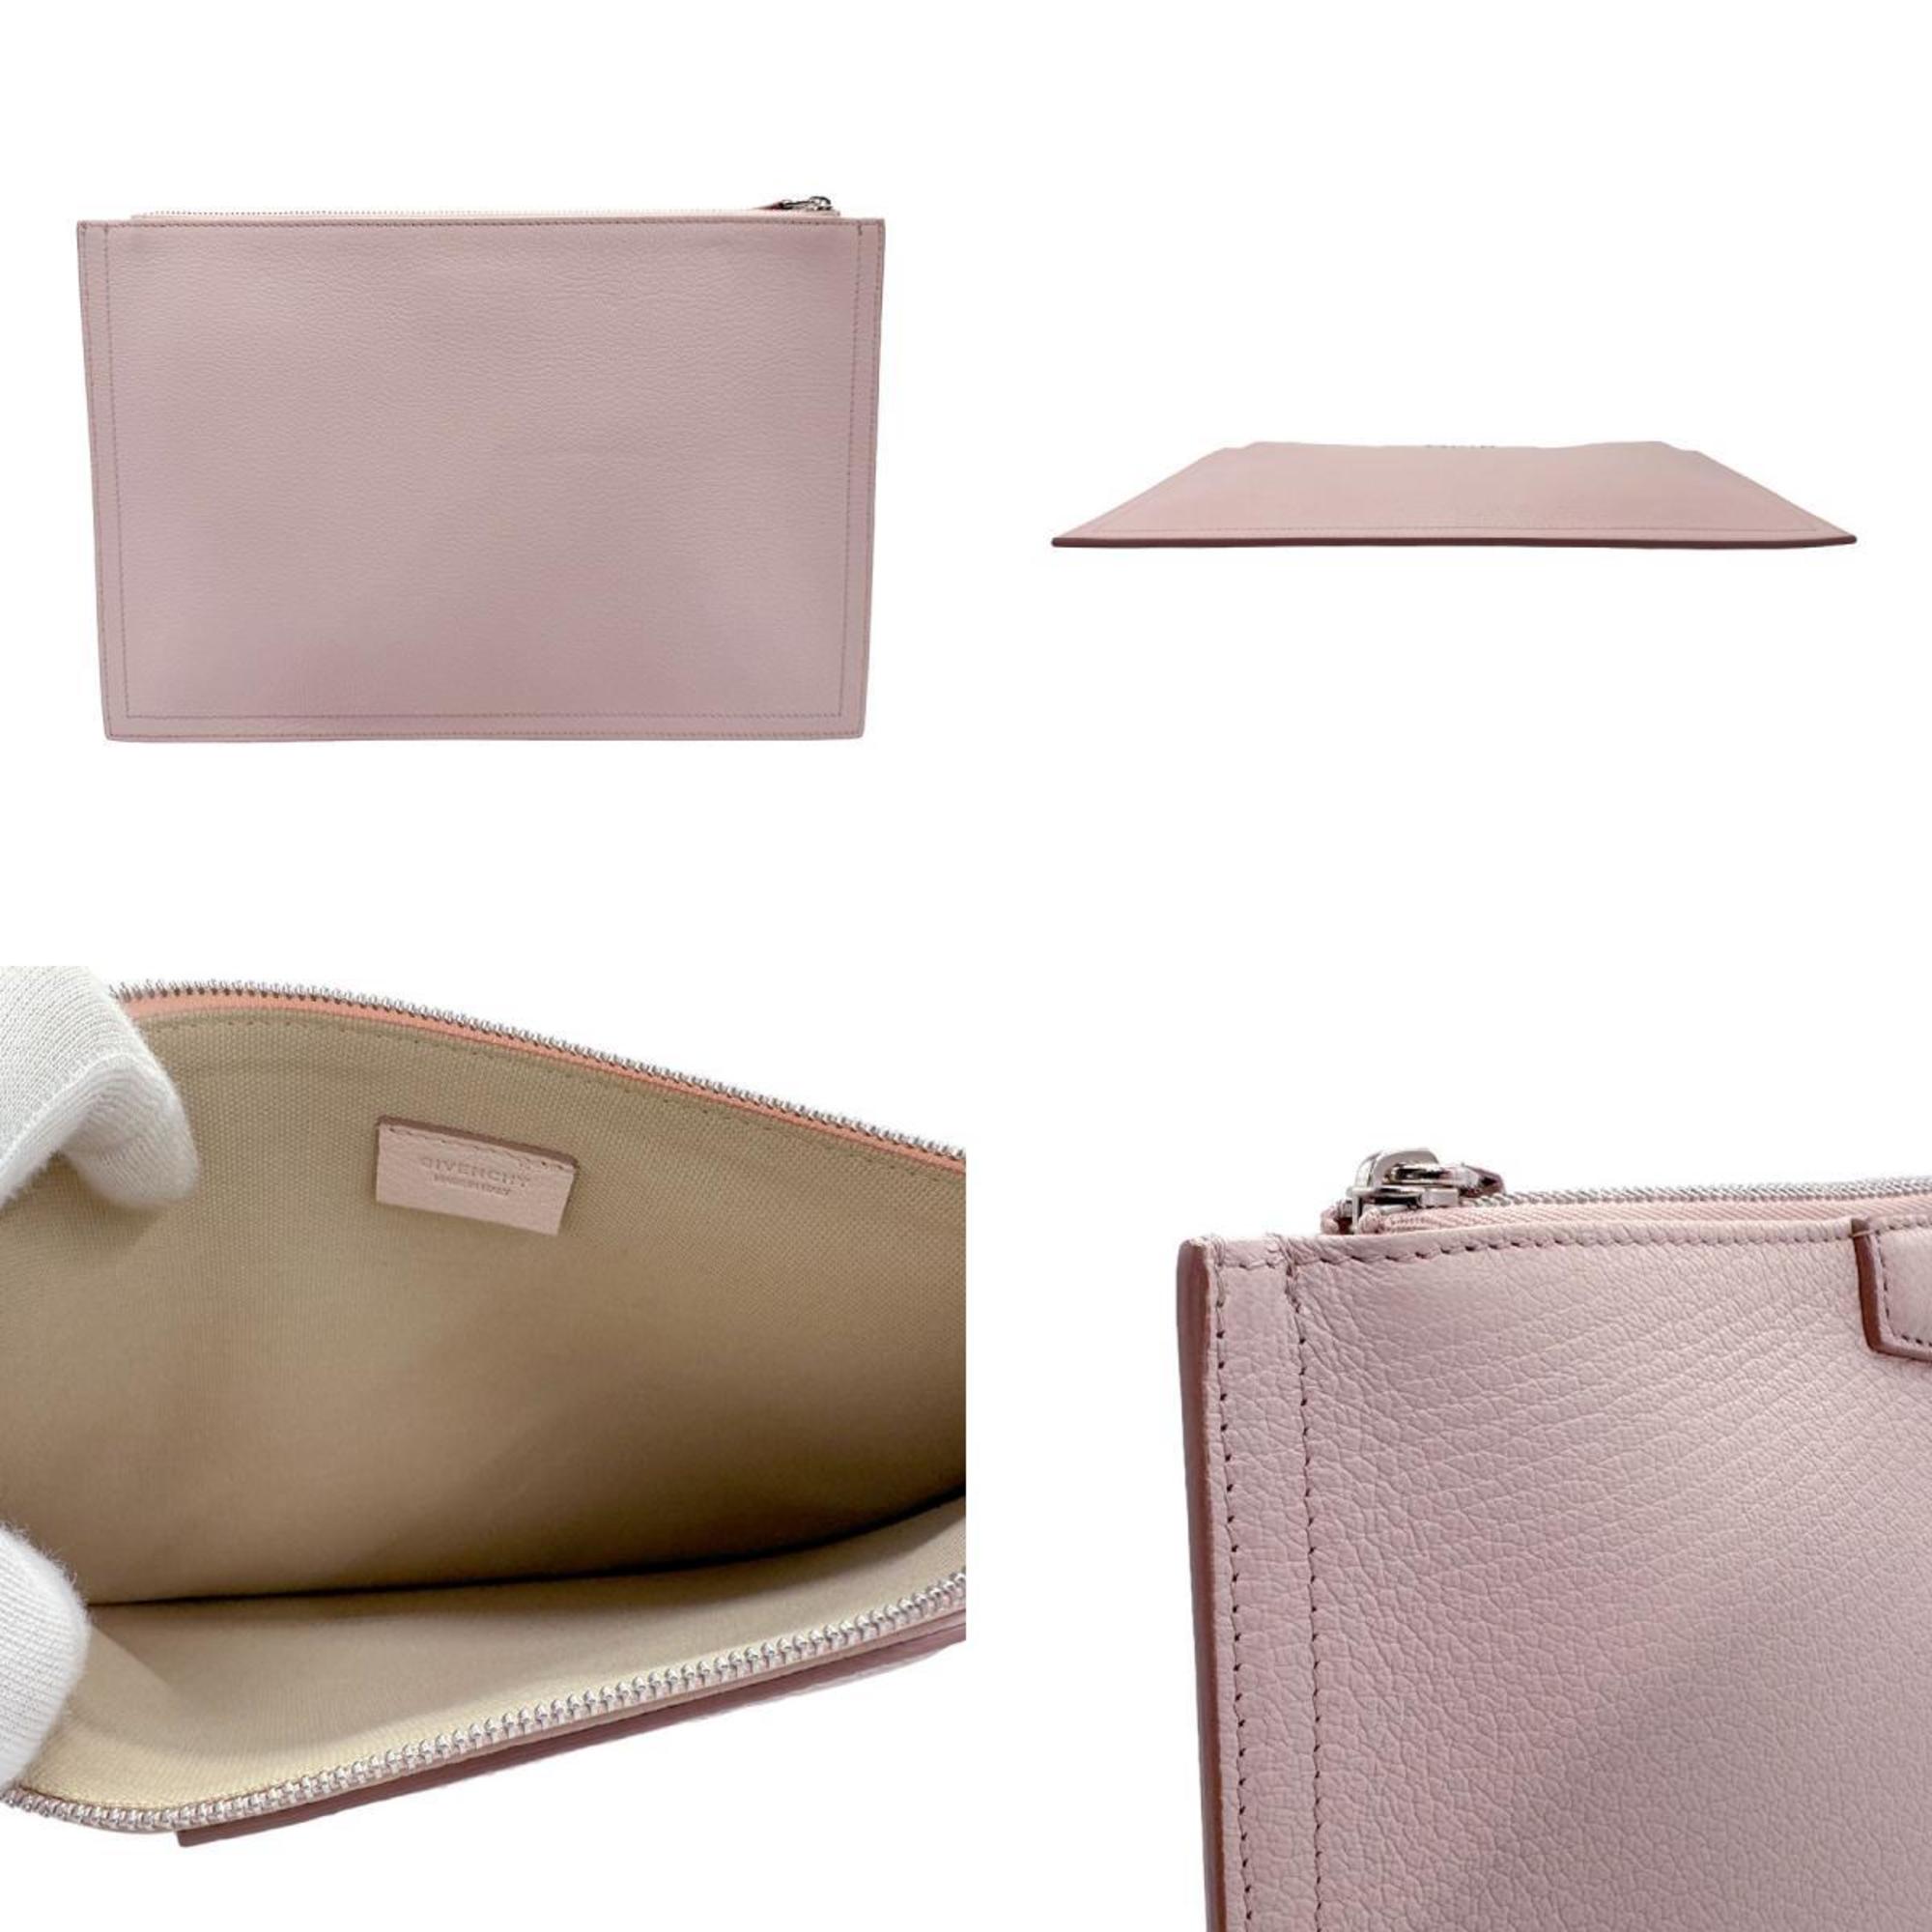 Givenchy clutch bag pouch leather light pink silver women's z1559